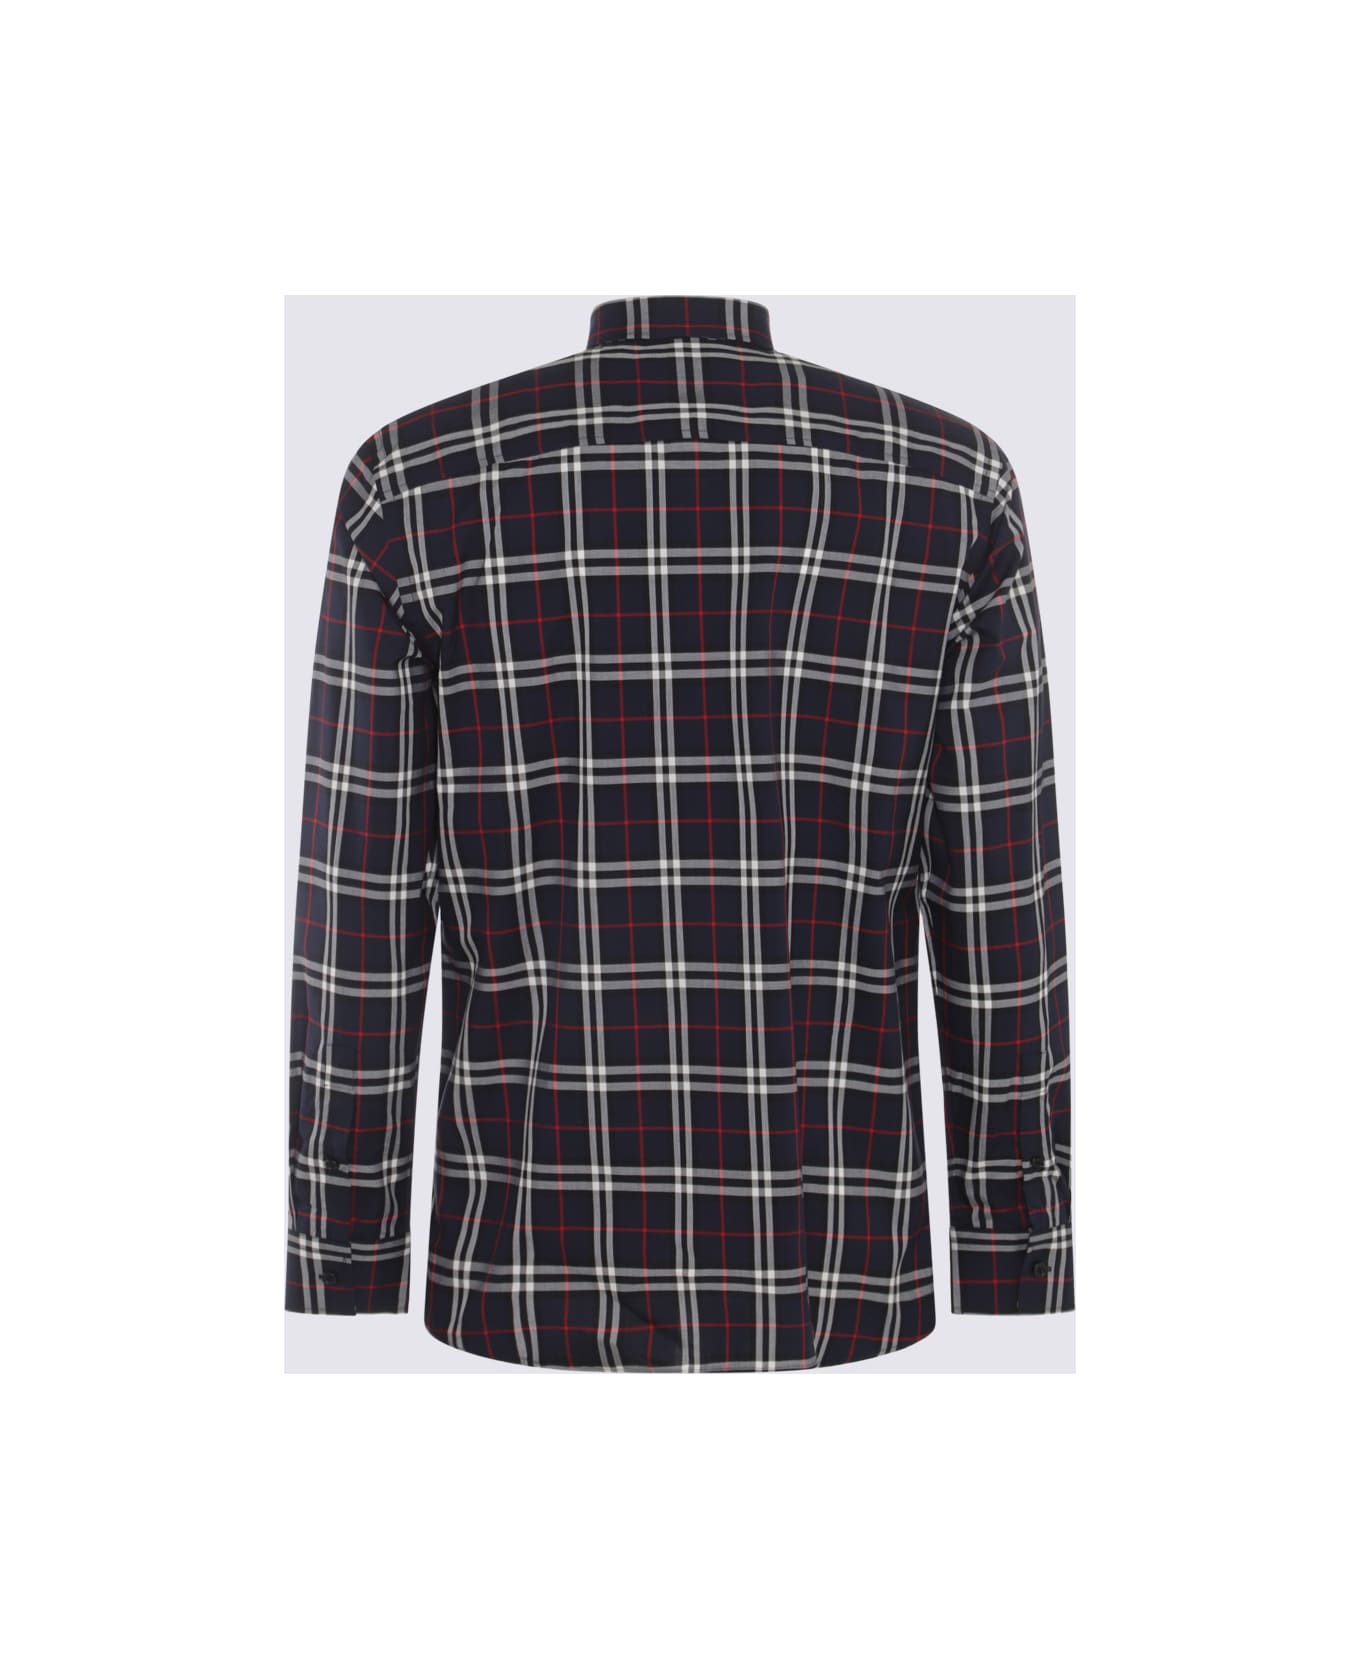 Burberry Navy And Red Cotton Shirt - NAVY IP CHECK シャツ